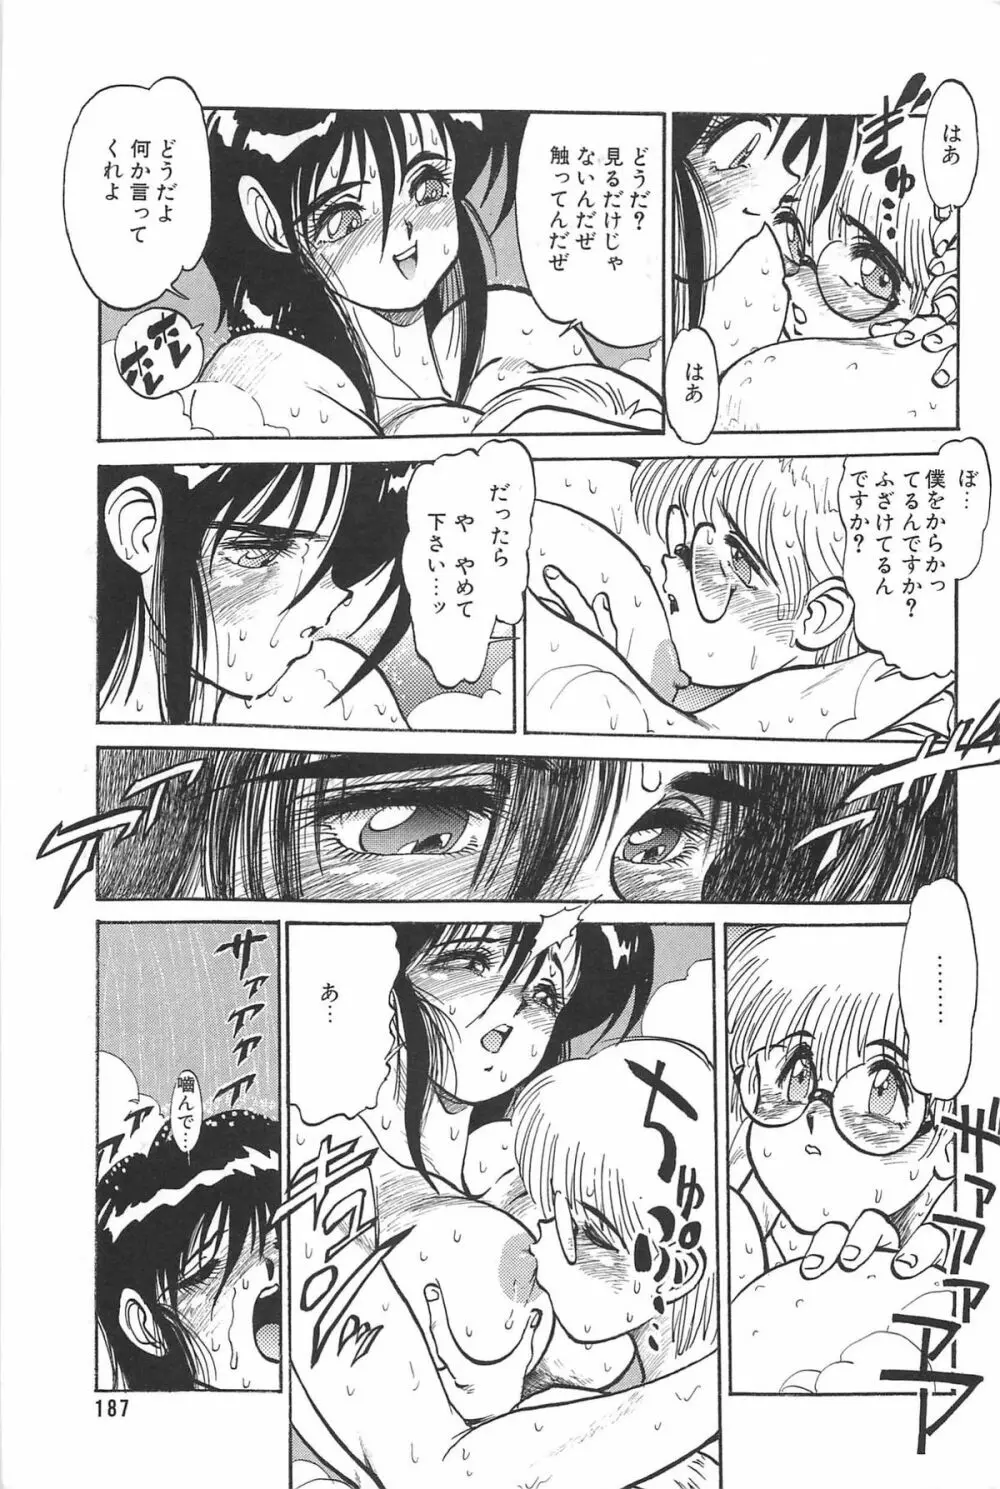 LOVE ME 1995 Page.189